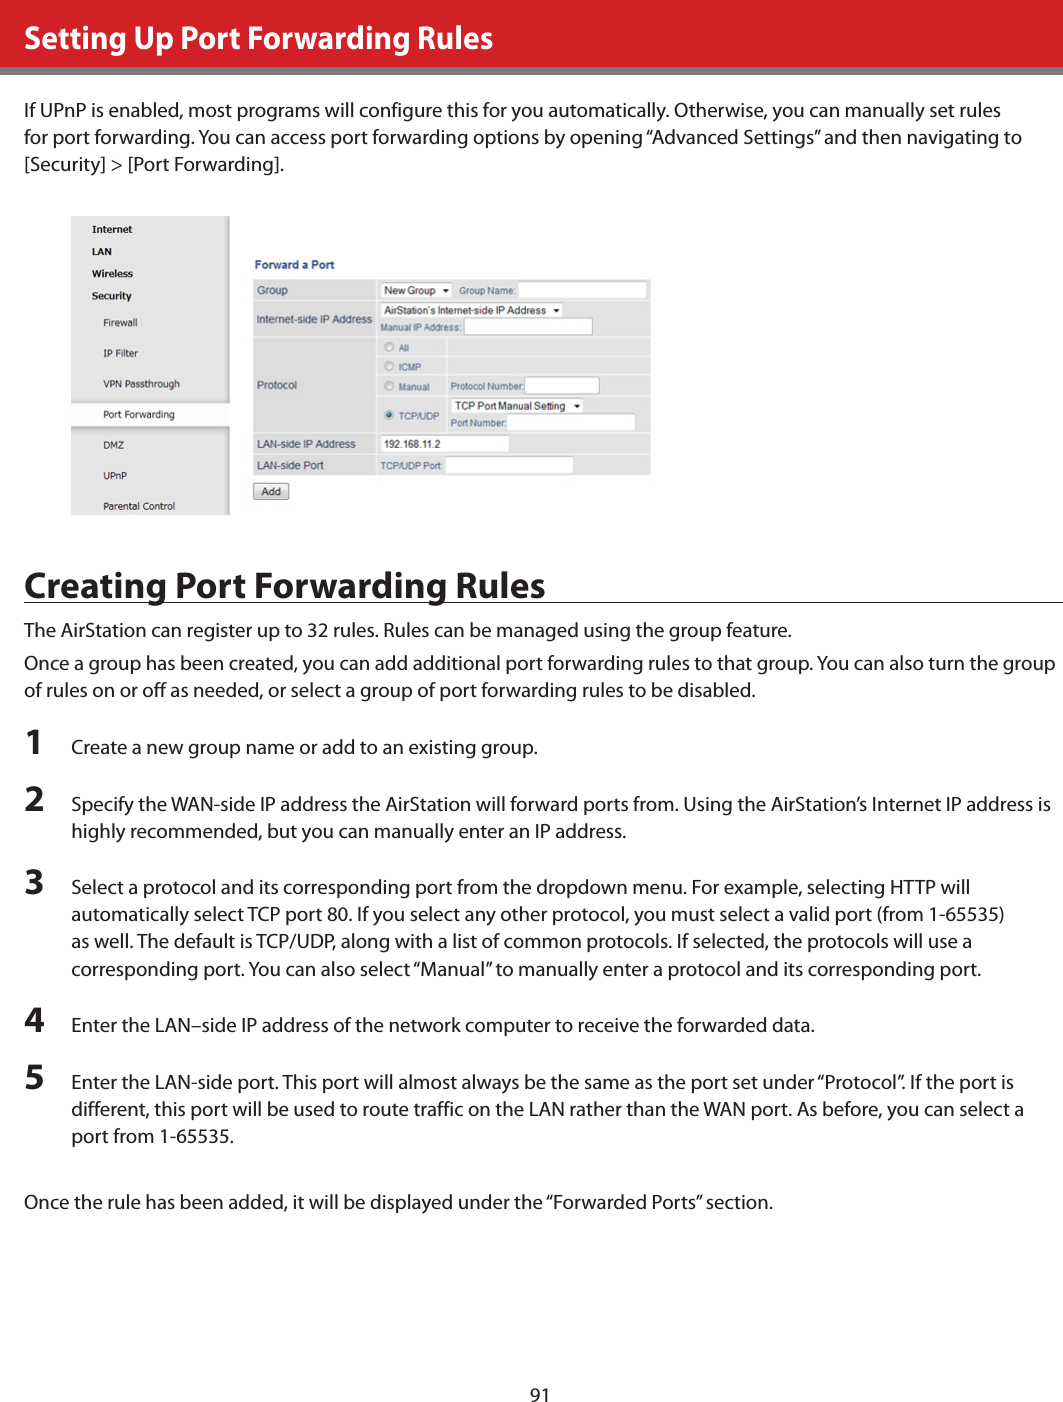 91Setting Up Port Forwarding RulesIf UPnP is enabled, most programs will configure this for you automatically. Otherwise, you can manually set rules for port forwarding. You can access port forwarding options by opening “Advanced Settings” and then navigating to [Security] &gt; [Port Forwarding].Creating Port Forwarding RulesThe AirStation can register up to 32 rules. Rules can be managed using the group feature. Once a group has been created, you can add additional port forwarding rules to that group. You can also turn the group of rules on or off as needed, or select a group of port forwarding rules to be disabled.1  Create a new group name or add to an existing group.2  Specify the WAN-side IP address the AirStation will forward ports from. Using the AirStation’s Internet IP address is highly recommended, but you can manually enter an IP address.3  Select a protocol and its corresponding port from the dropdown menu. For example, selecting HTTP will automatically select TCP port 80. If you select any other protocol, you must select a valid port (from 1-65535) as well. The default is TCP/UDP, along with a list of common protocols. If selected, the protocols will use a corresponding port. You can also select “Manual” to manually enter a protocol and its corresponding port.4  Enter the LAN–side IP address of the network computer to receive the forwarded data.5  Enter the LAN-side port. This port will almost always be the same as the port set under “Protocol”. If the port is different, this port will be used to route traffic on the LAN rather than the WAN port. As before, you can select a port from 1-65535.Once the rule has been added, it will be displayed under the “Forwarded Ports” section. 